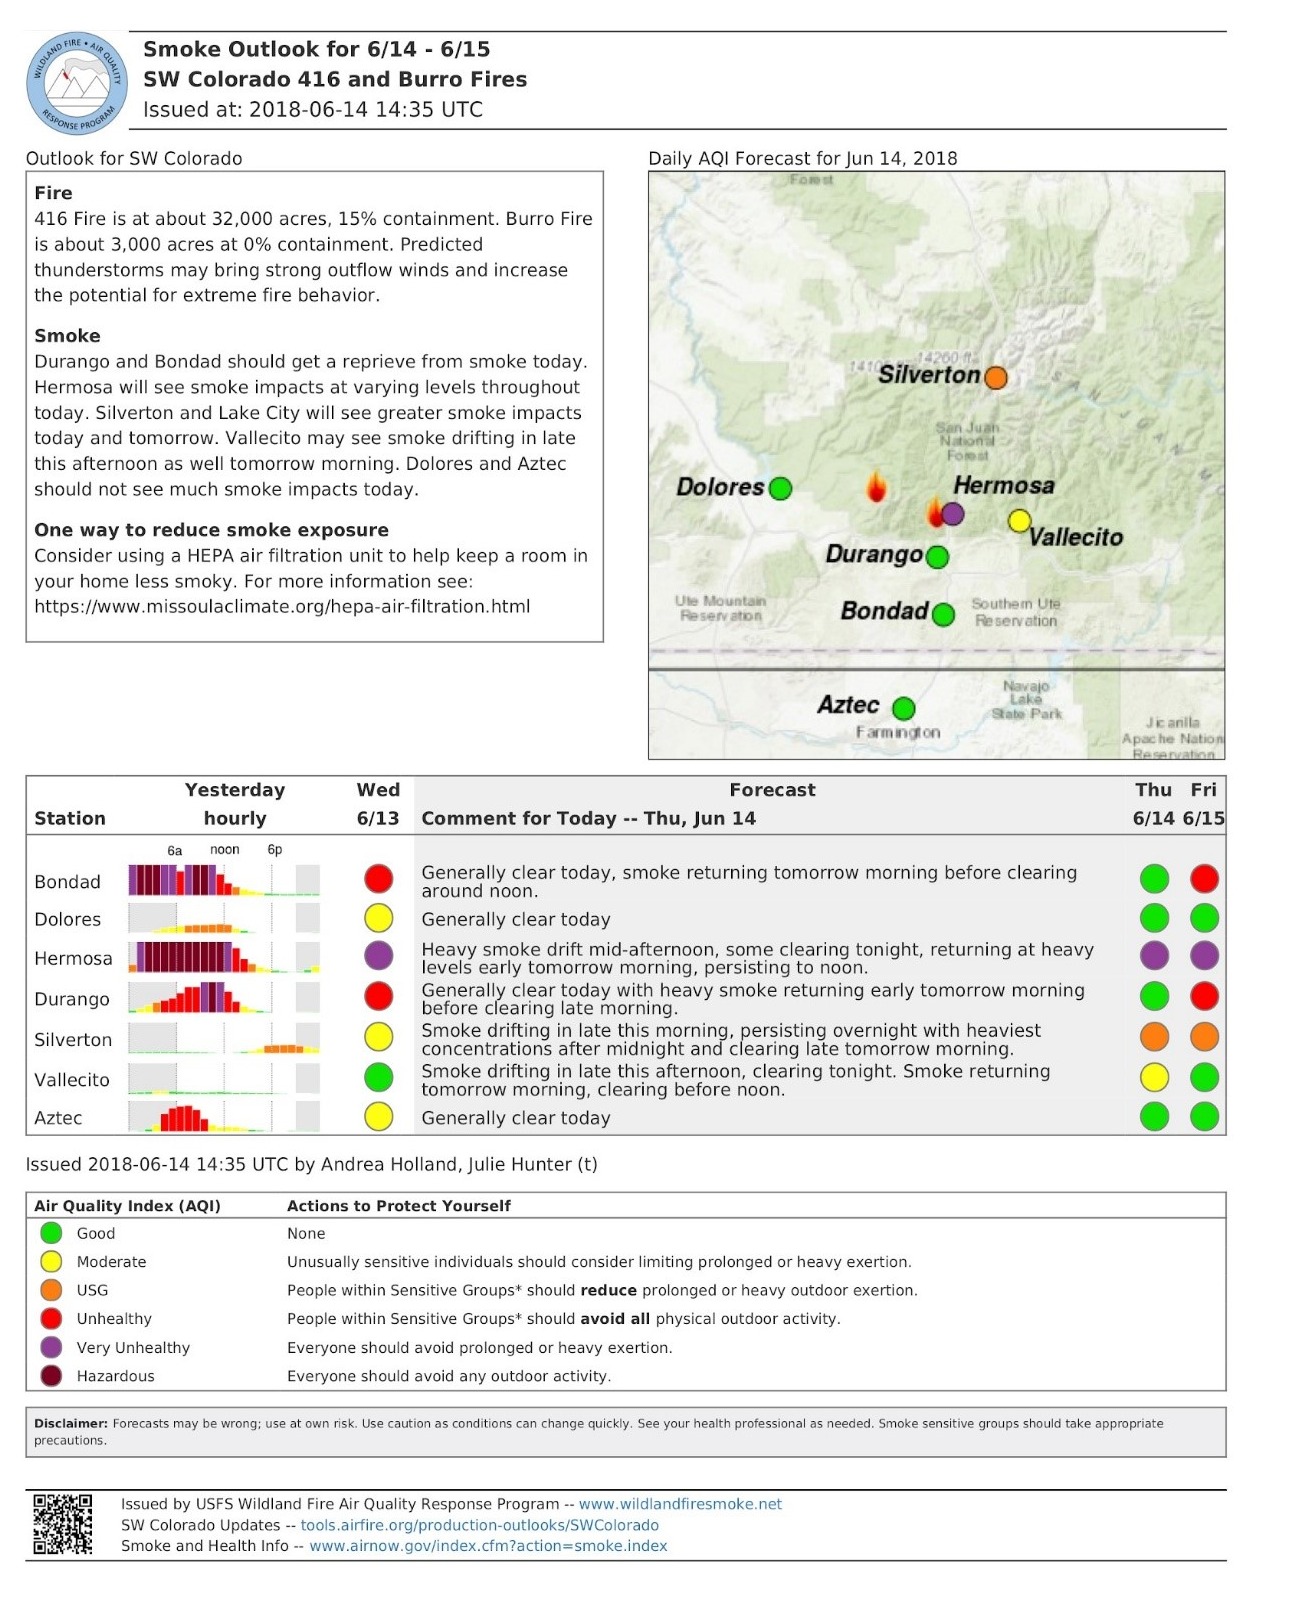 Example of smoke outlook issues in Colorado describing acres burned, percent containment, potential fire behavior, predicted smoke impacts, and one way to reduce smoke exposure.